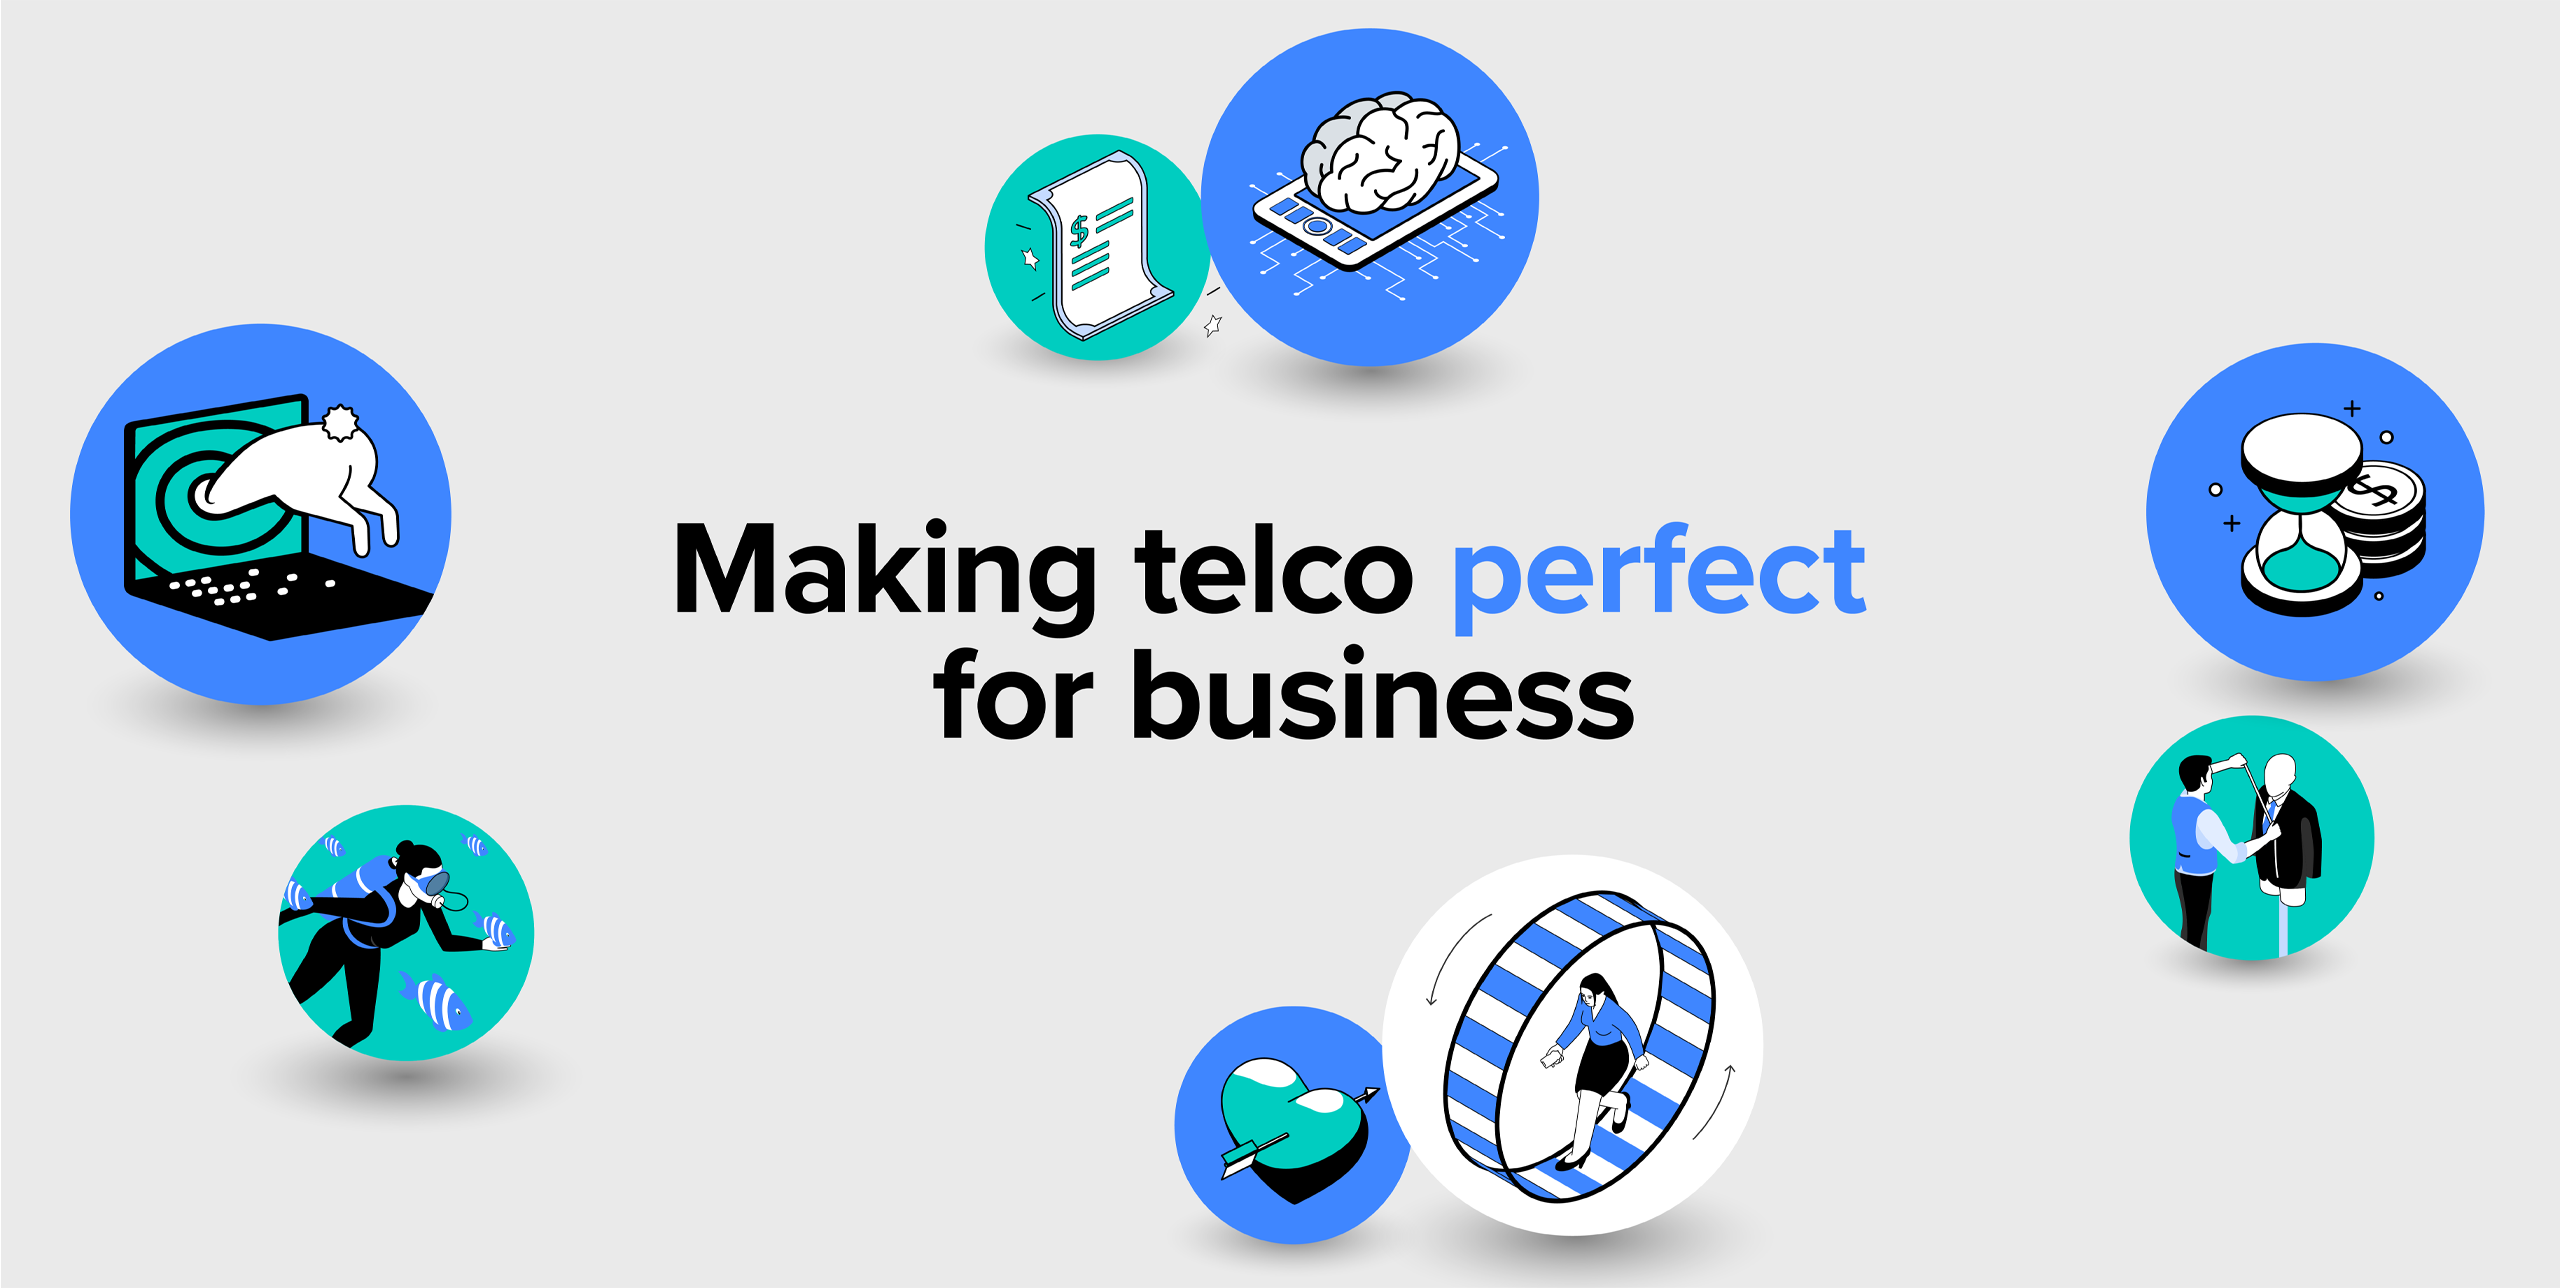 Making telco perfect for business